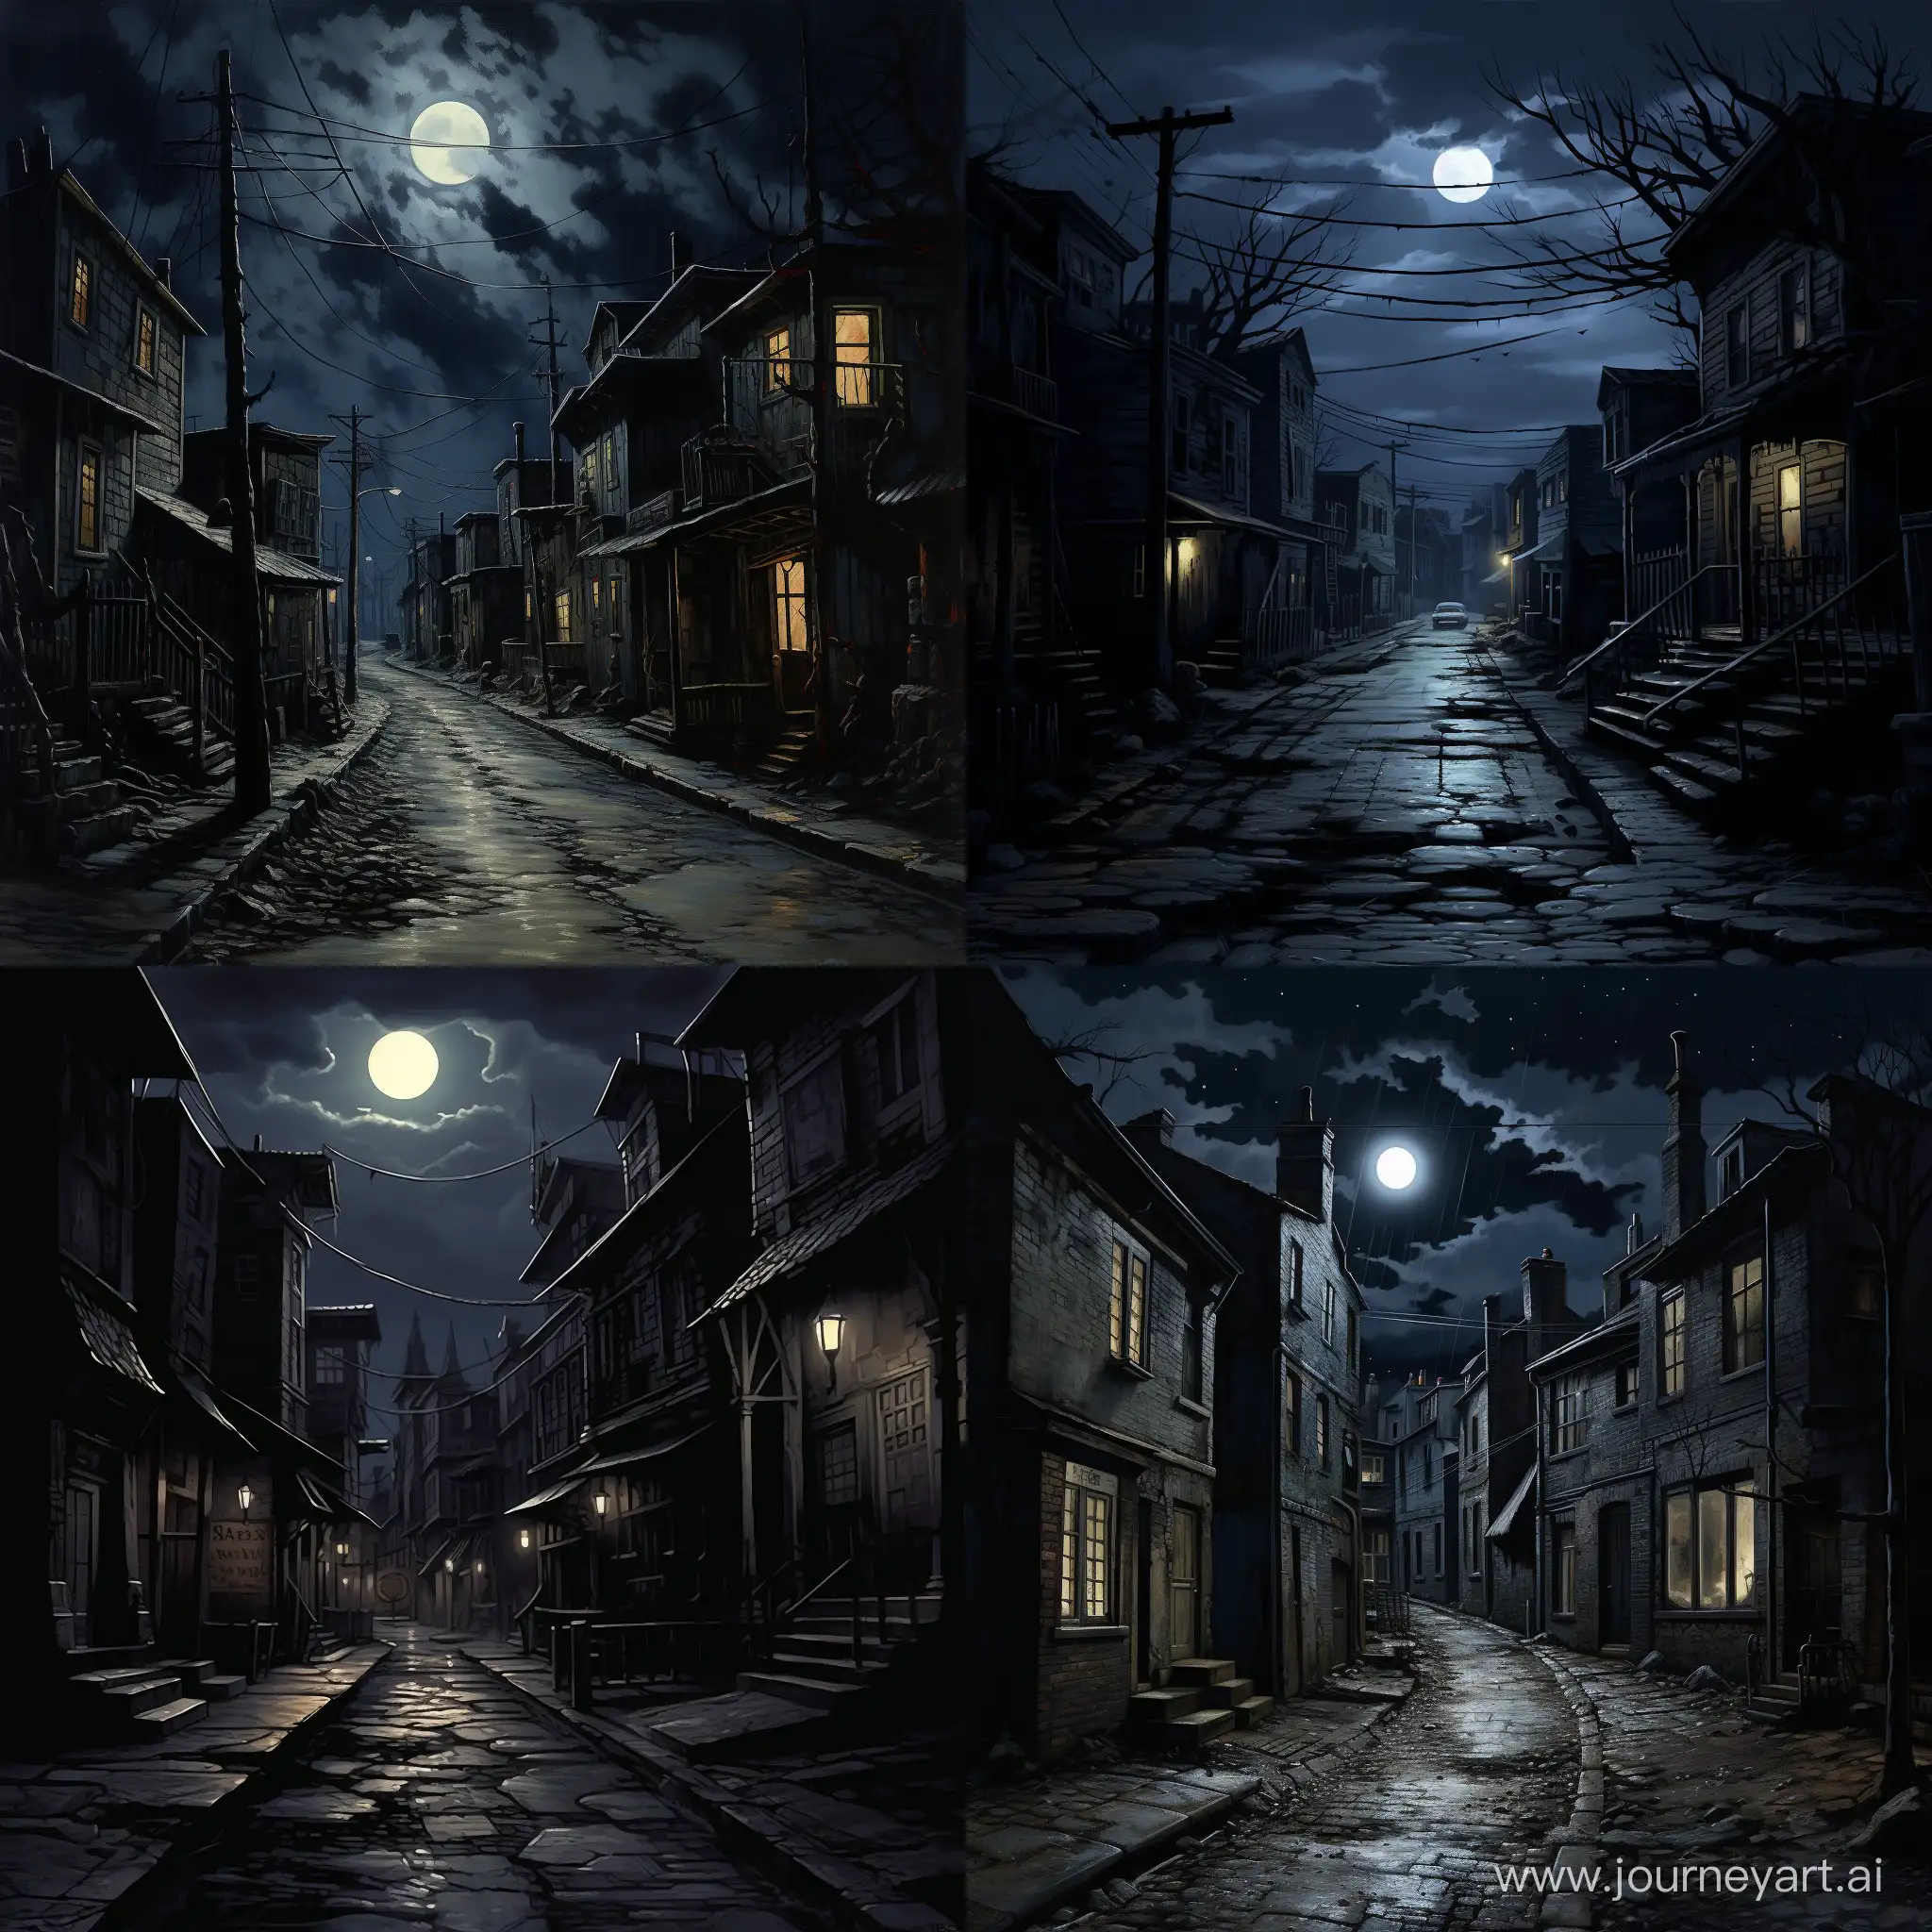 Mysterious-Night-Scene-with-Moonlit-Street